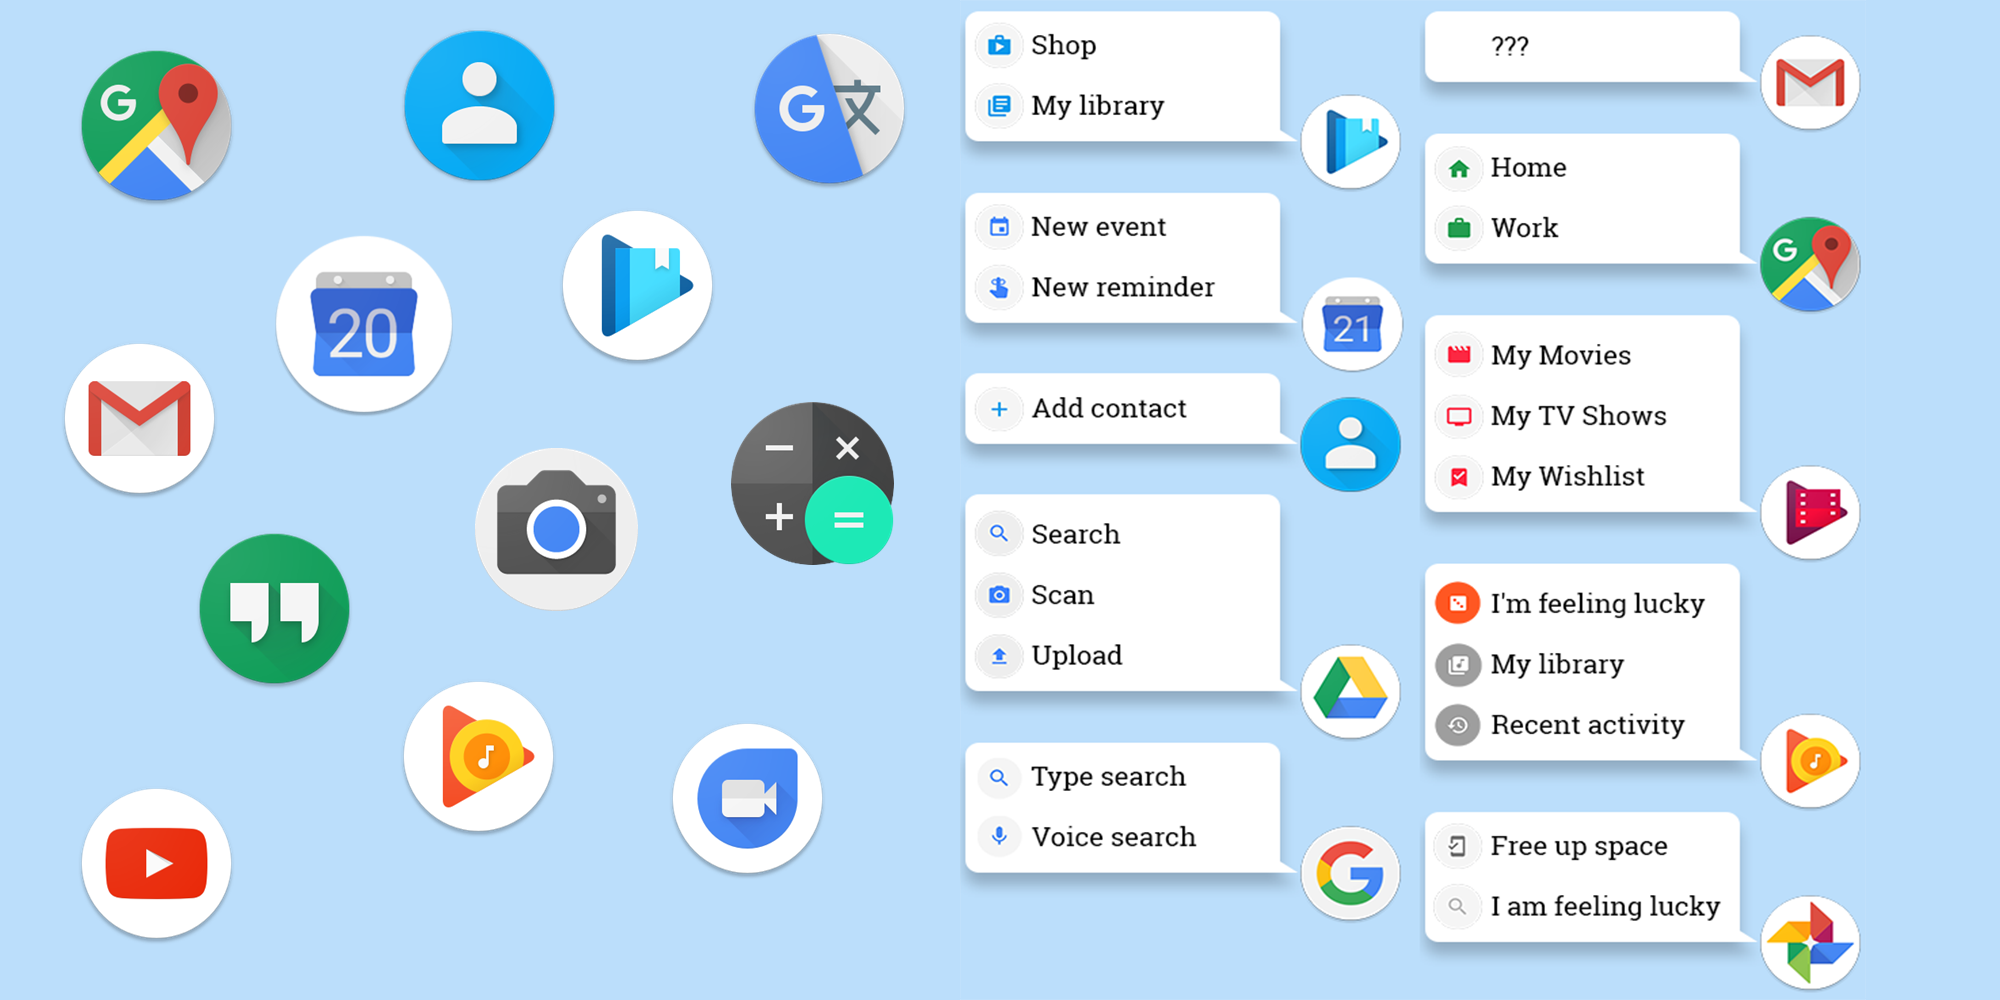 pixellauncher_shortcuts_rounded_1